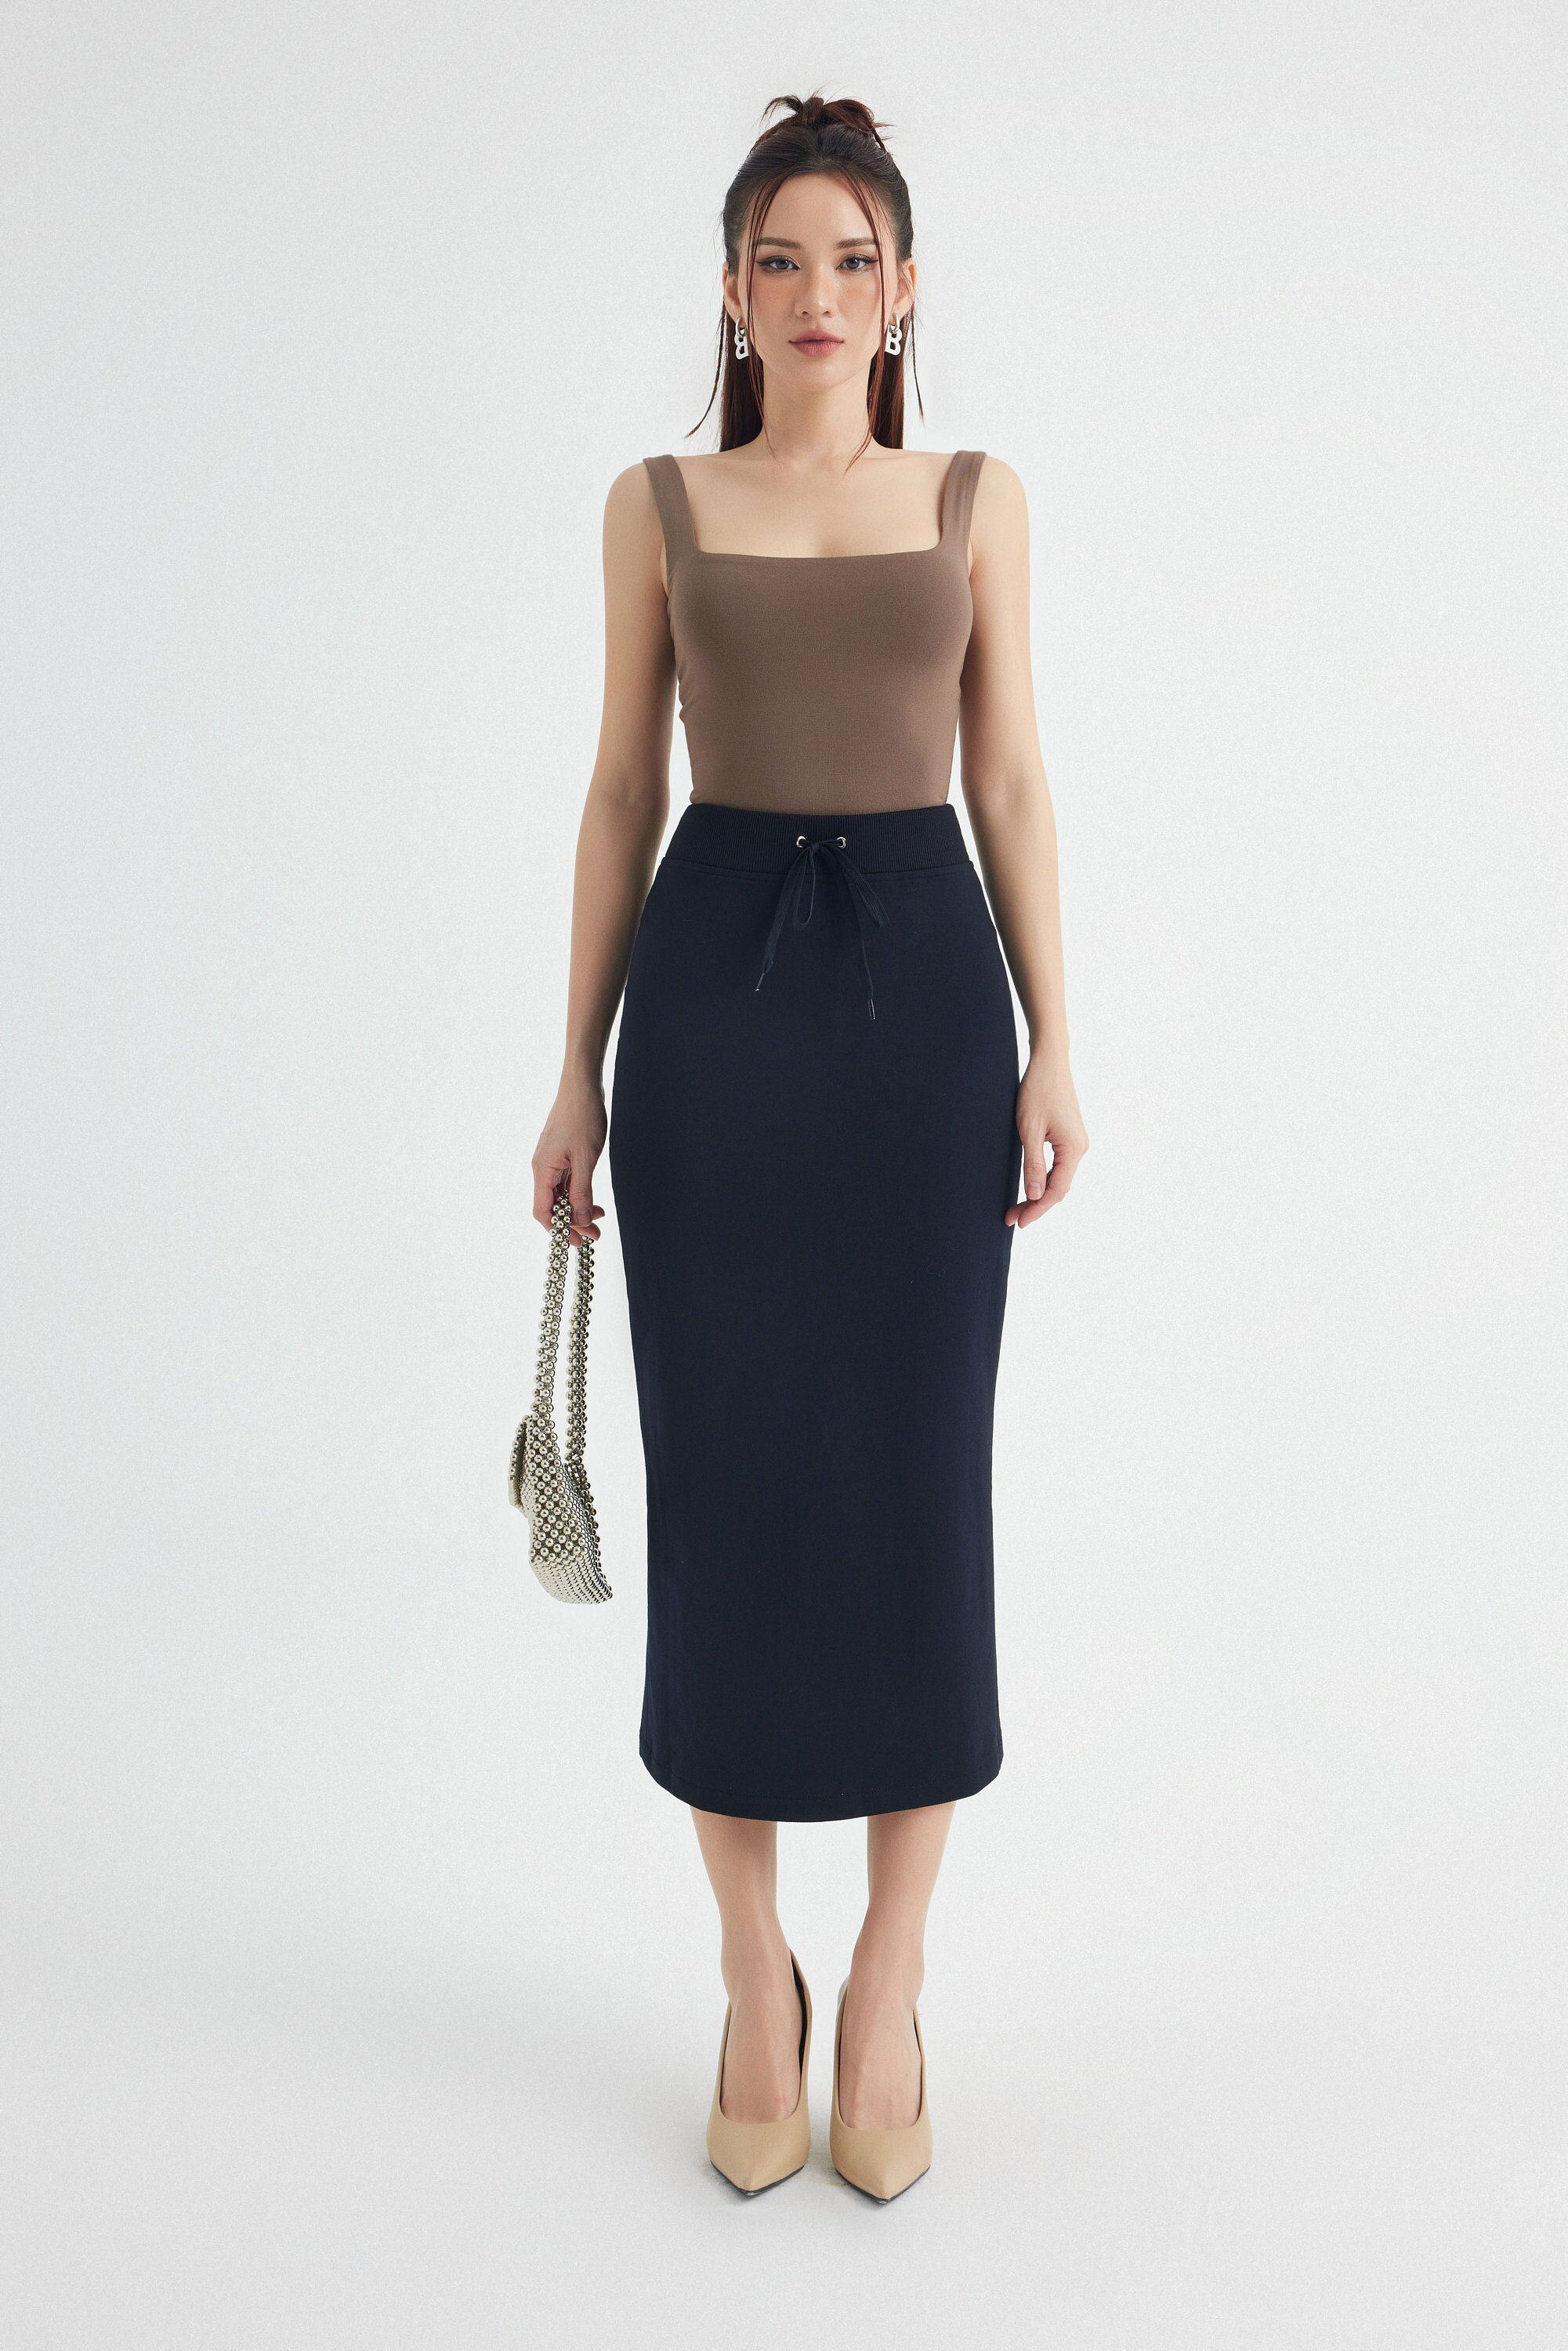 Buy Pencil Skirts, High Waisted Skirts in Black, Gray, Brown & Dark Green,  Professional, Elegant, Office Wear, Work Wear, Casual, Cocktail CVDC2  Online in India 